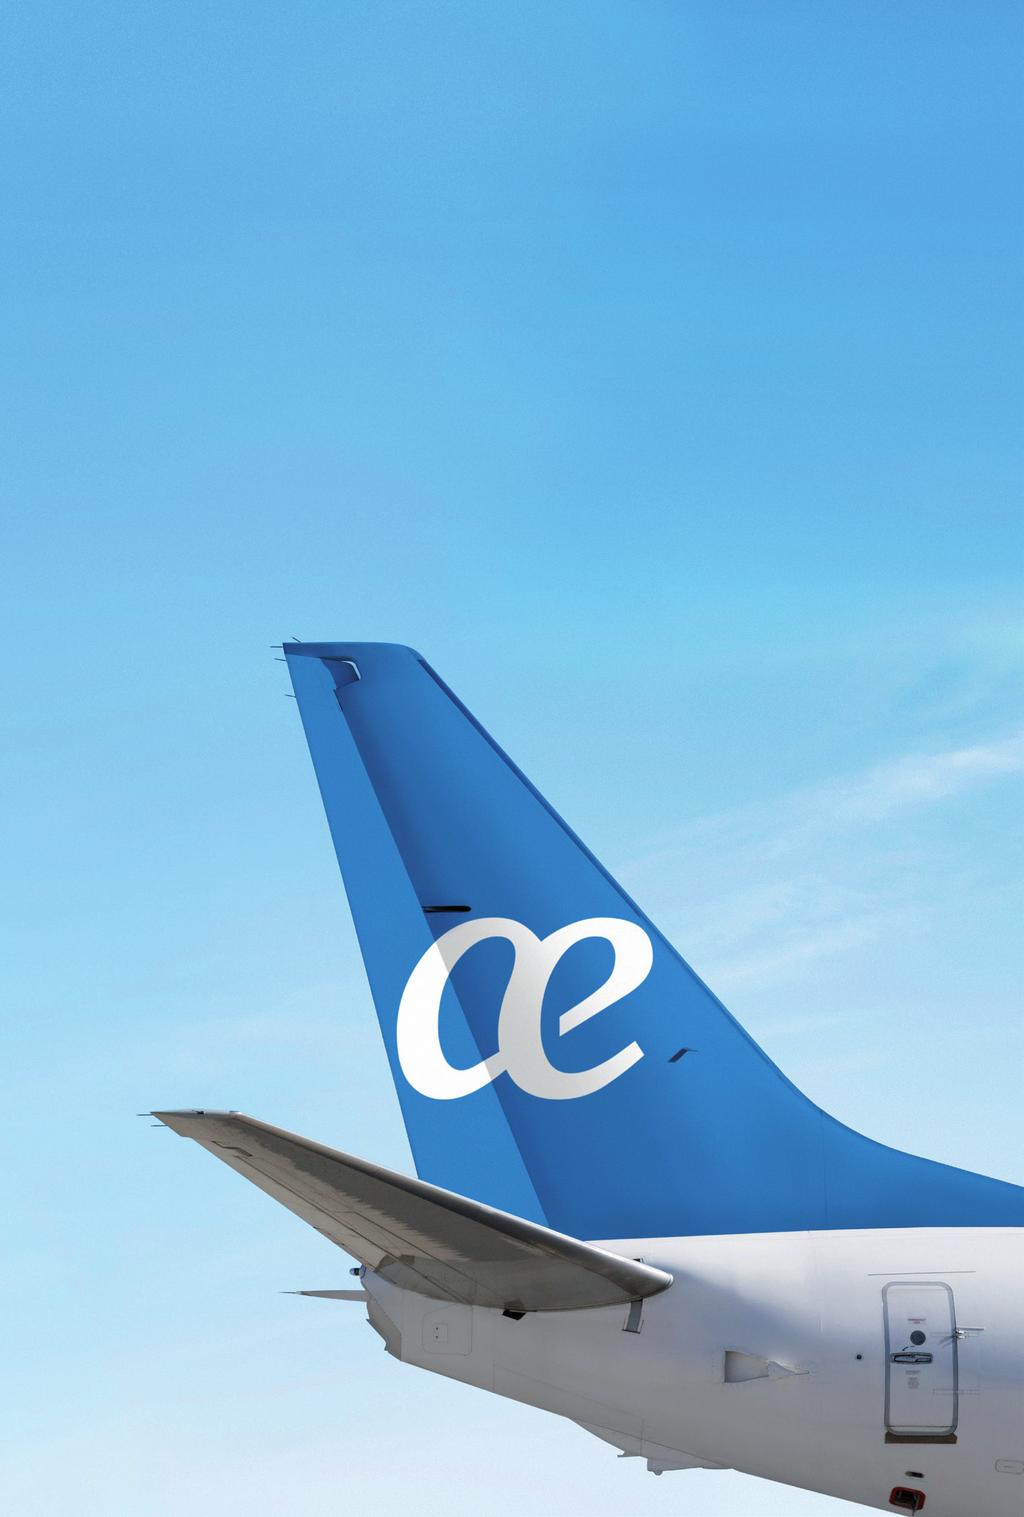 Air Europa is the airline of Globalia Group, a leader in the travel and tourism